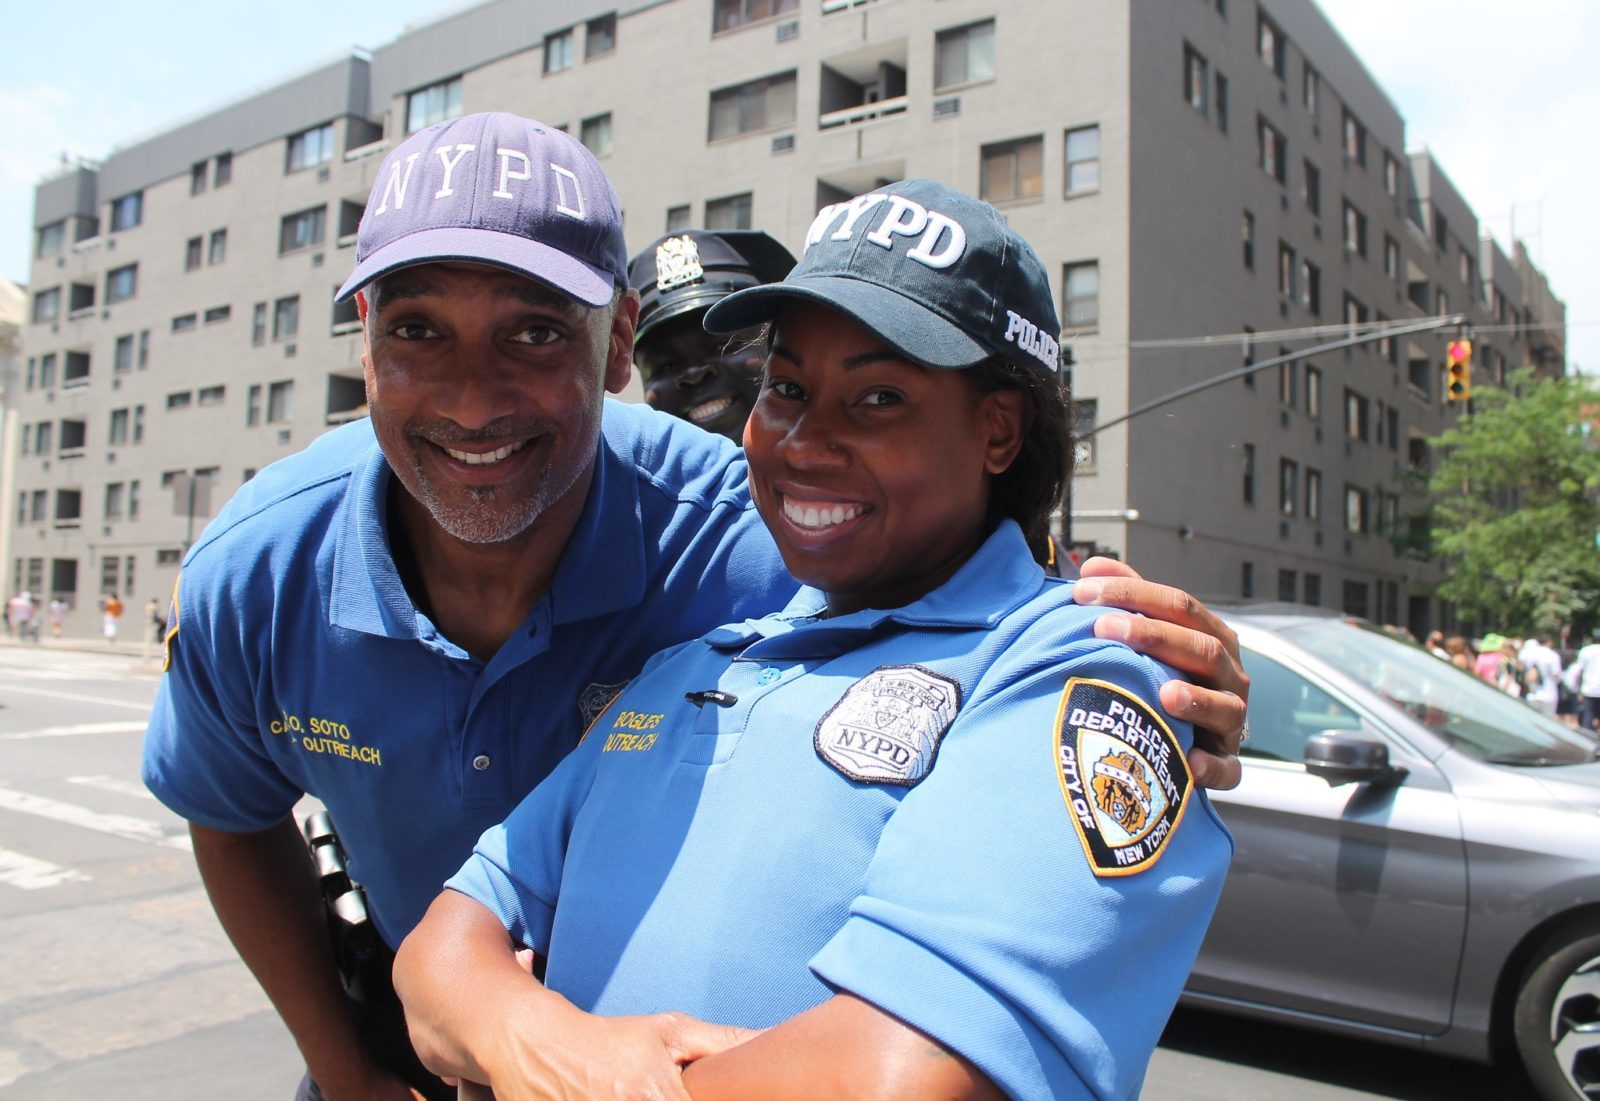 Two New York City Police Officers do community outreach on a sunny summer day